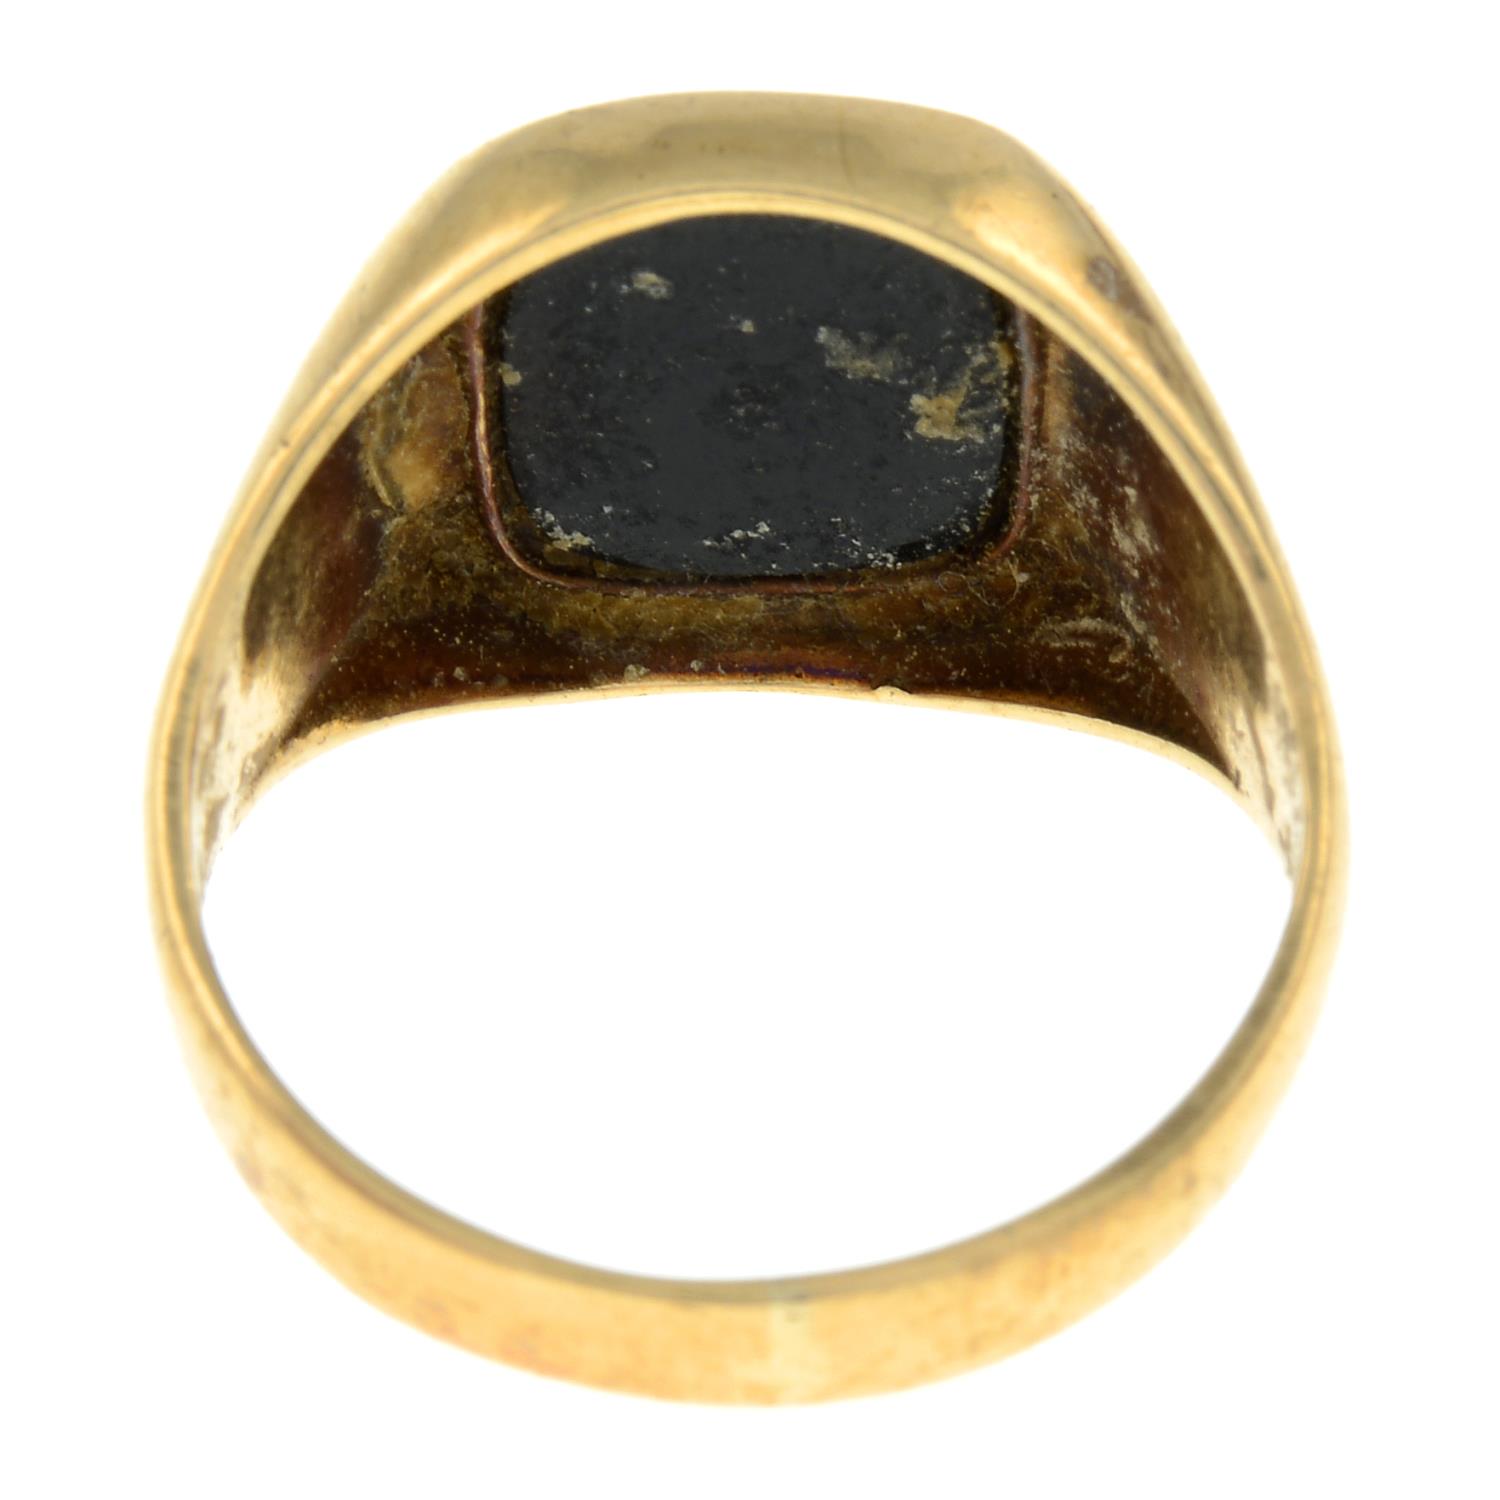 A 9ct gold onyx signet ring.Hallmarks for 9ct gold. - Image 2 of 2